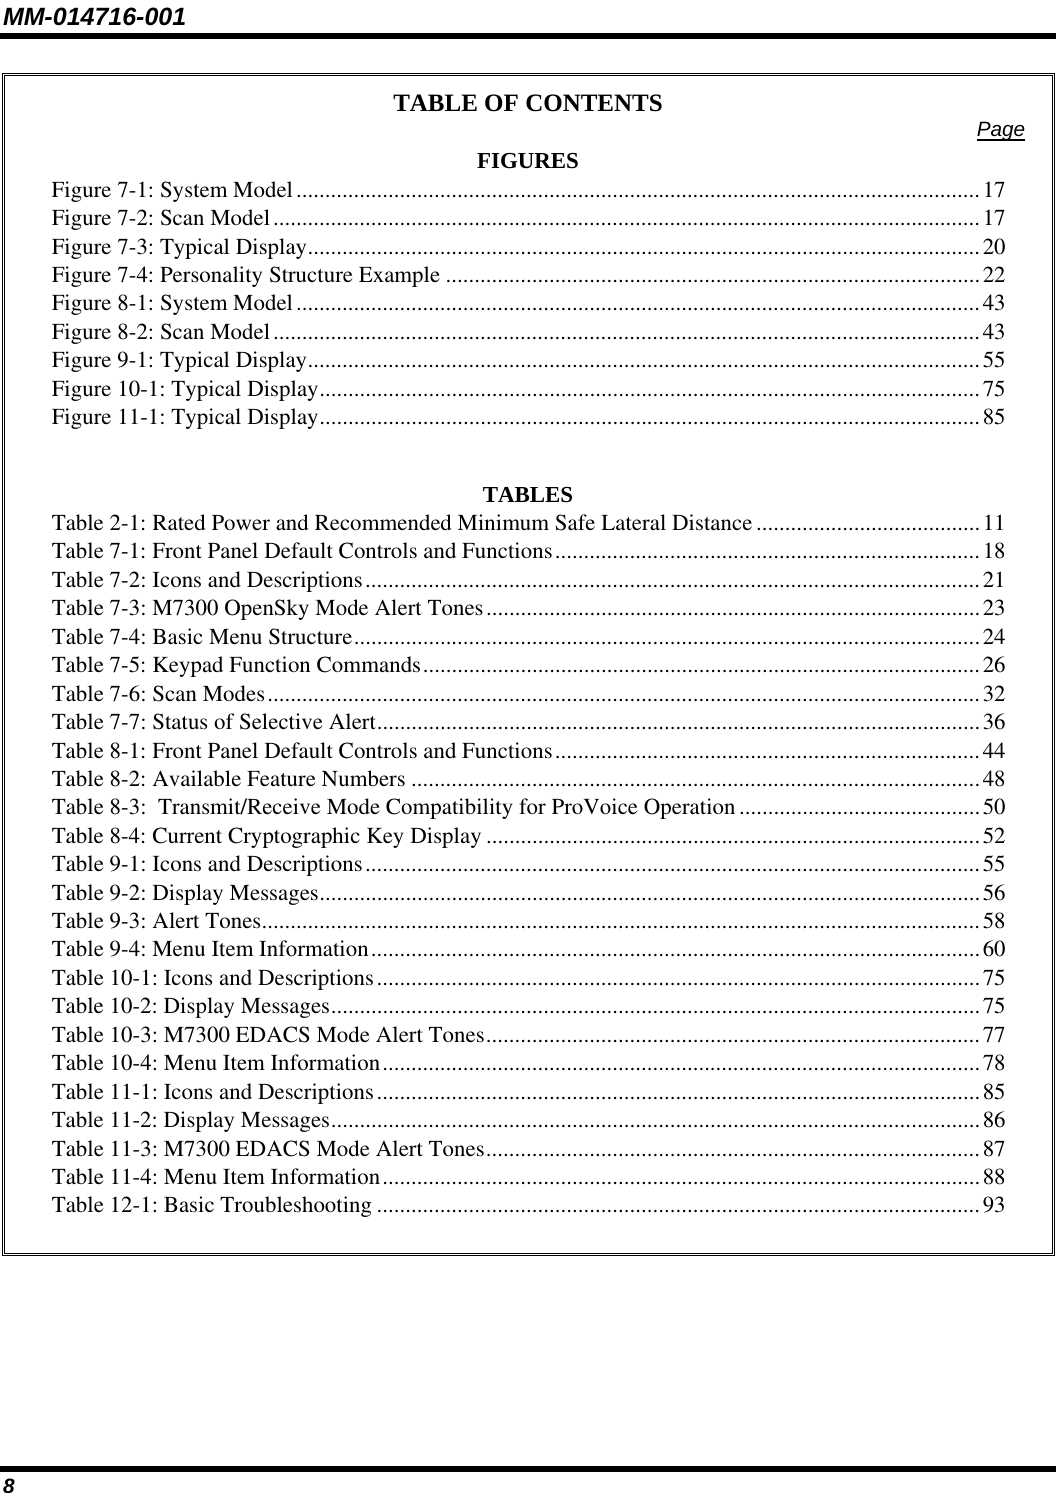 MM-014716-001 8 TABLE OF CONTENTS  Page FIGURES Figure 7-1: System Model.......................................................................................................................17 Figure 7-2: Scan Model...........................................................................................................................17 Figure 7-3: Typical Display.....................................................................................................................20 Figure 7-4: Personality Structure Example .............................................................................................22 Figure 8-1: System Model.......................................................................................................................43 Figure 8-2: Scan Model...........................................................................................................................43 Figure 9-1: Typical Display.....................................................................................................................55 Figure 10-1: Typical Display...................................................................................................................75 Figure 11-1: Typical Display...................................................................................................................85   TABLES Table 2-1: Rated Power and Recommended Minimum Safe Lateral Distance.......................................11 Table 7-1: Front Panel Default Controls and Functions..........................................................................18 Table 7-2: Icons and Descriptions...........................................................................................................21 Table 7-3: M7300 OpenSky Mode Alert Tones......................................................................................23 Table 7-4: Basic Menu Structure.............................................................................................................24 Table 7-5: Keypad Function Commands.................................................................................................26 Table 7-6: Scan Modes............................................................................................................................32 Table 7-7: Status of Selective Alert.........................................................................................................36 Table 8-1: Front Panel Default Controls and Functions..........................................................................44 Table 8-2: Available Feature Numbers ...................................................................................................48 Table 8-3:  Transmit/Receive Mode Compatibility for ProVoice Operation..........................................50 Table 8-4: Current Cryptographic Key Display ......................................................................................52 Table 9-1: Icons and Descriptions...........................................................................................................55 Table 9-2: Display Messages...................................................................................................................56 Table 9-3: Alert Tones.............................................................................................................................58 Table 9-4: Menu Item Information..........................................................................................................60 Table 10-1: Icons and Descriptions.........................................................................................................75 Table 10-2: Display Messages.................................................................................................................75 Table 10-3: M7300 EDACS Mode Alert Tones......................................................................................77 Table 10-4: Menu Item Information........................................................................................................78 Table 11-1: Icons and Descriptions.........................................................................................................85 Table 11-2: Display Messages.................................................................................................................86 Table 11-3: M7300 EDACS Mode Alert Tones......................................................................................87 Table 11-4: Menu Item Information........................................................................................................88 Table 12-1: Basic Troubleshooting .........................................................................................................93   